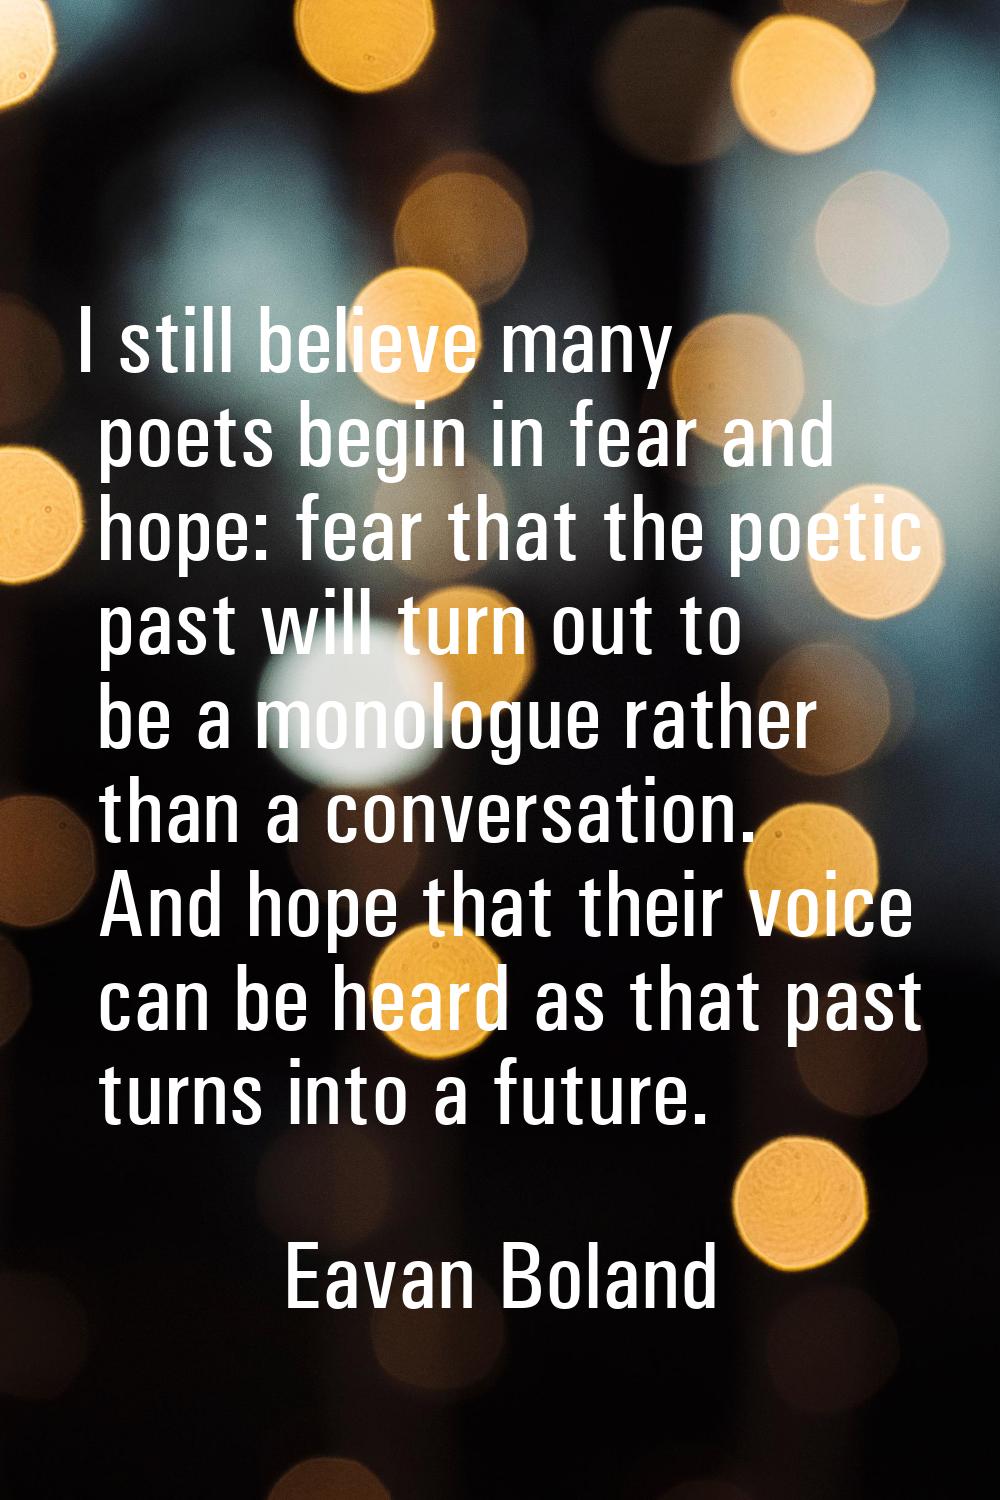 I still believe many poets begin in fear and hope: fear that the poetic past will turn out to be a 